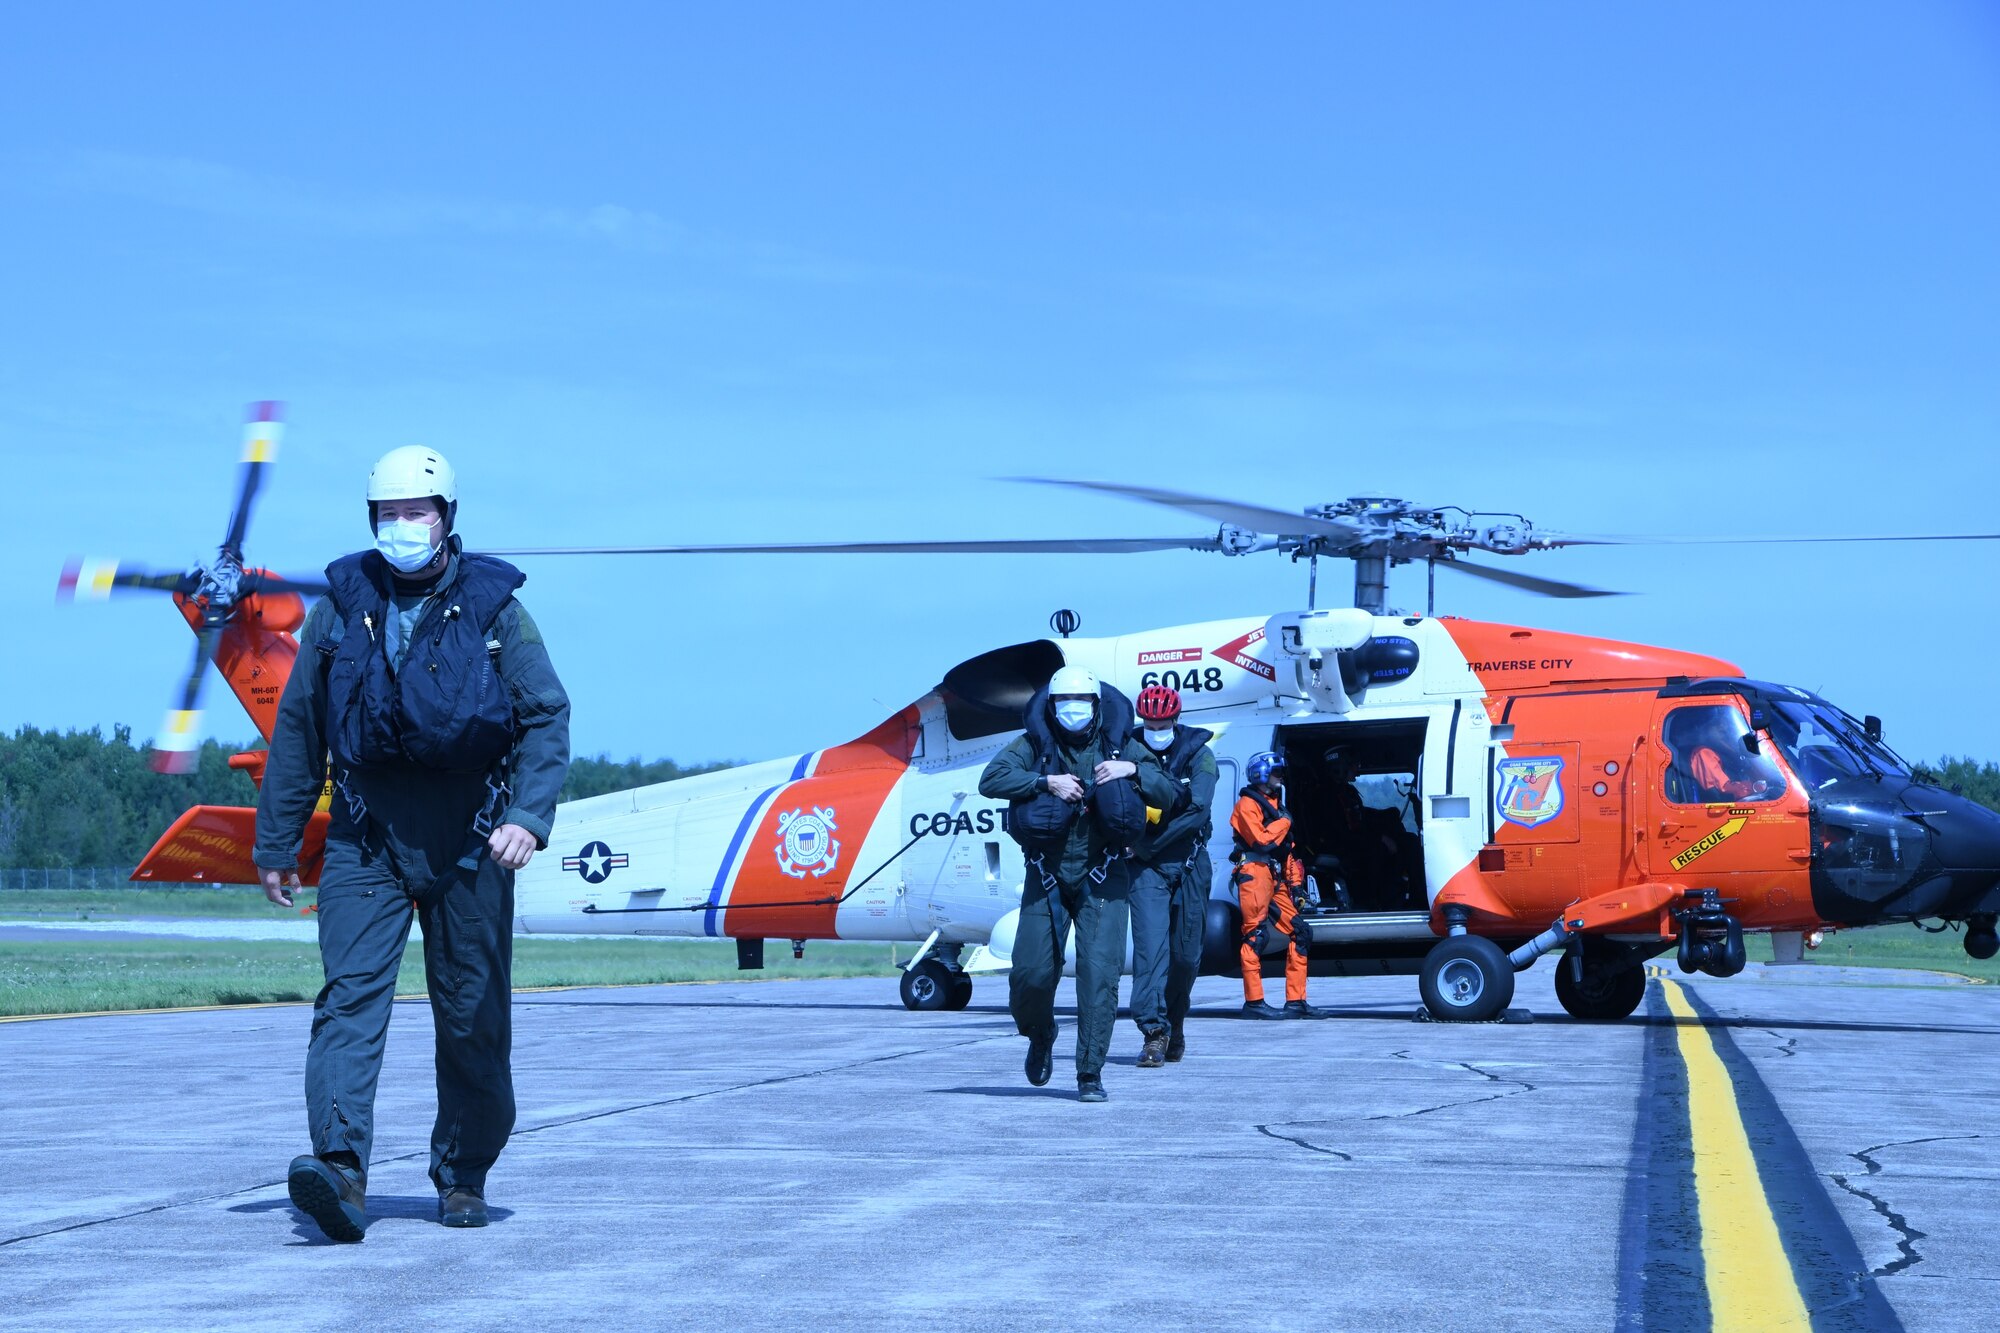 Pilots and aircrew flight equipment personnel from the 148th Fighter Wing, Minnesota Air National Guard exit a U.S. Coast Guard MH-60 Jayhawk from Air Station Traverse City, Michigan after being hoisted from Lake Superior during a joint water survival and rescue training mission near Duluth, Minnesota on August 25, 2020.